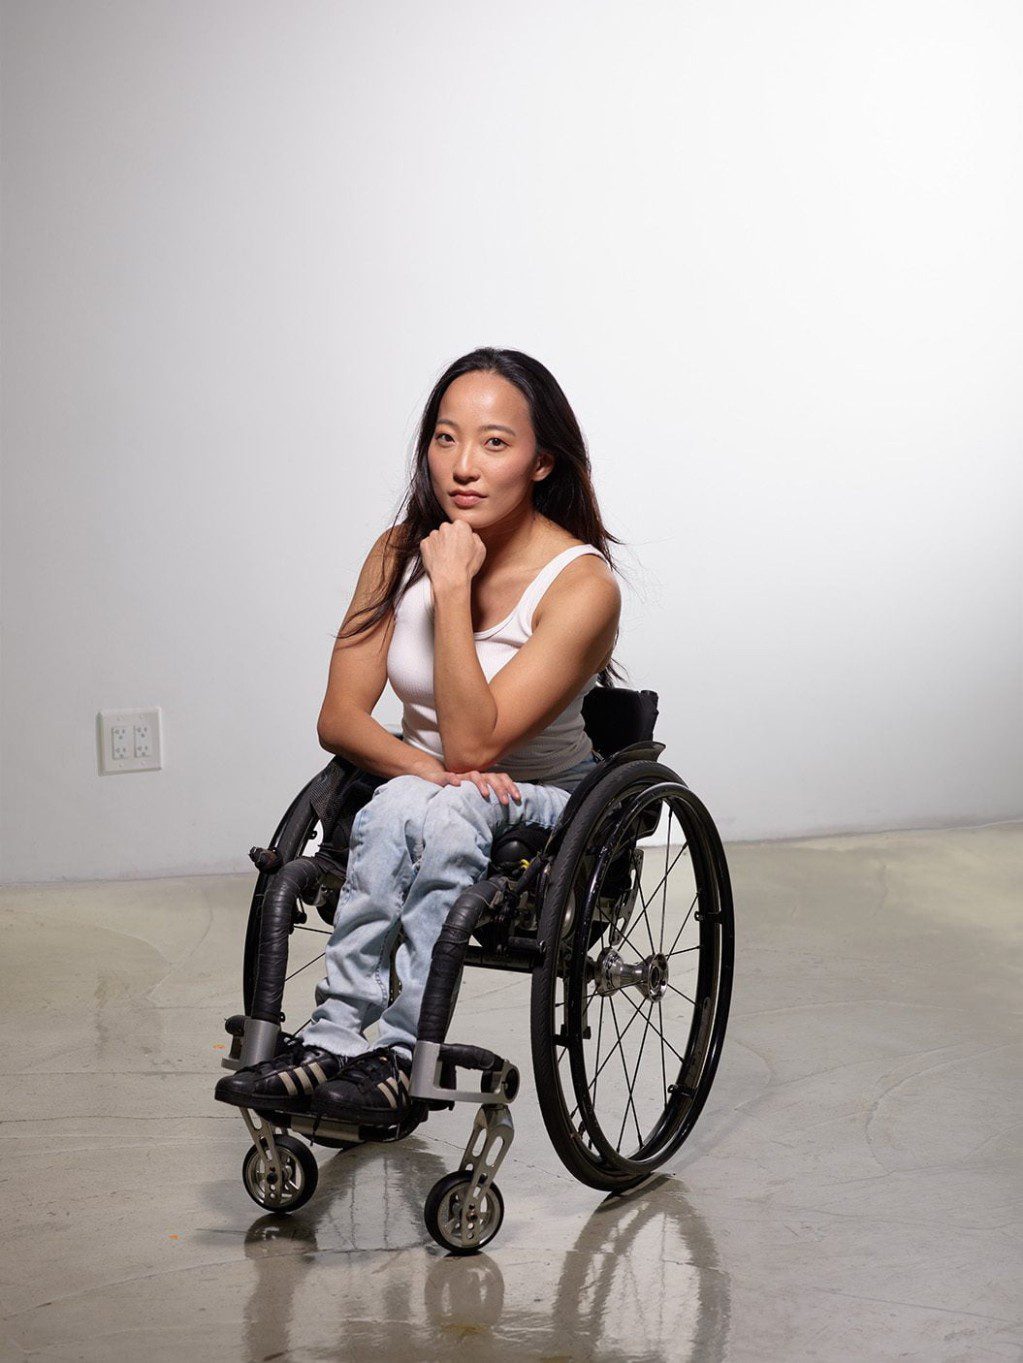 Julie poses for the camera. She is a woman of Japanese descent from Brazil, and is a wheelchair user. She has long black hair and wears a white tank top and blue jeans.